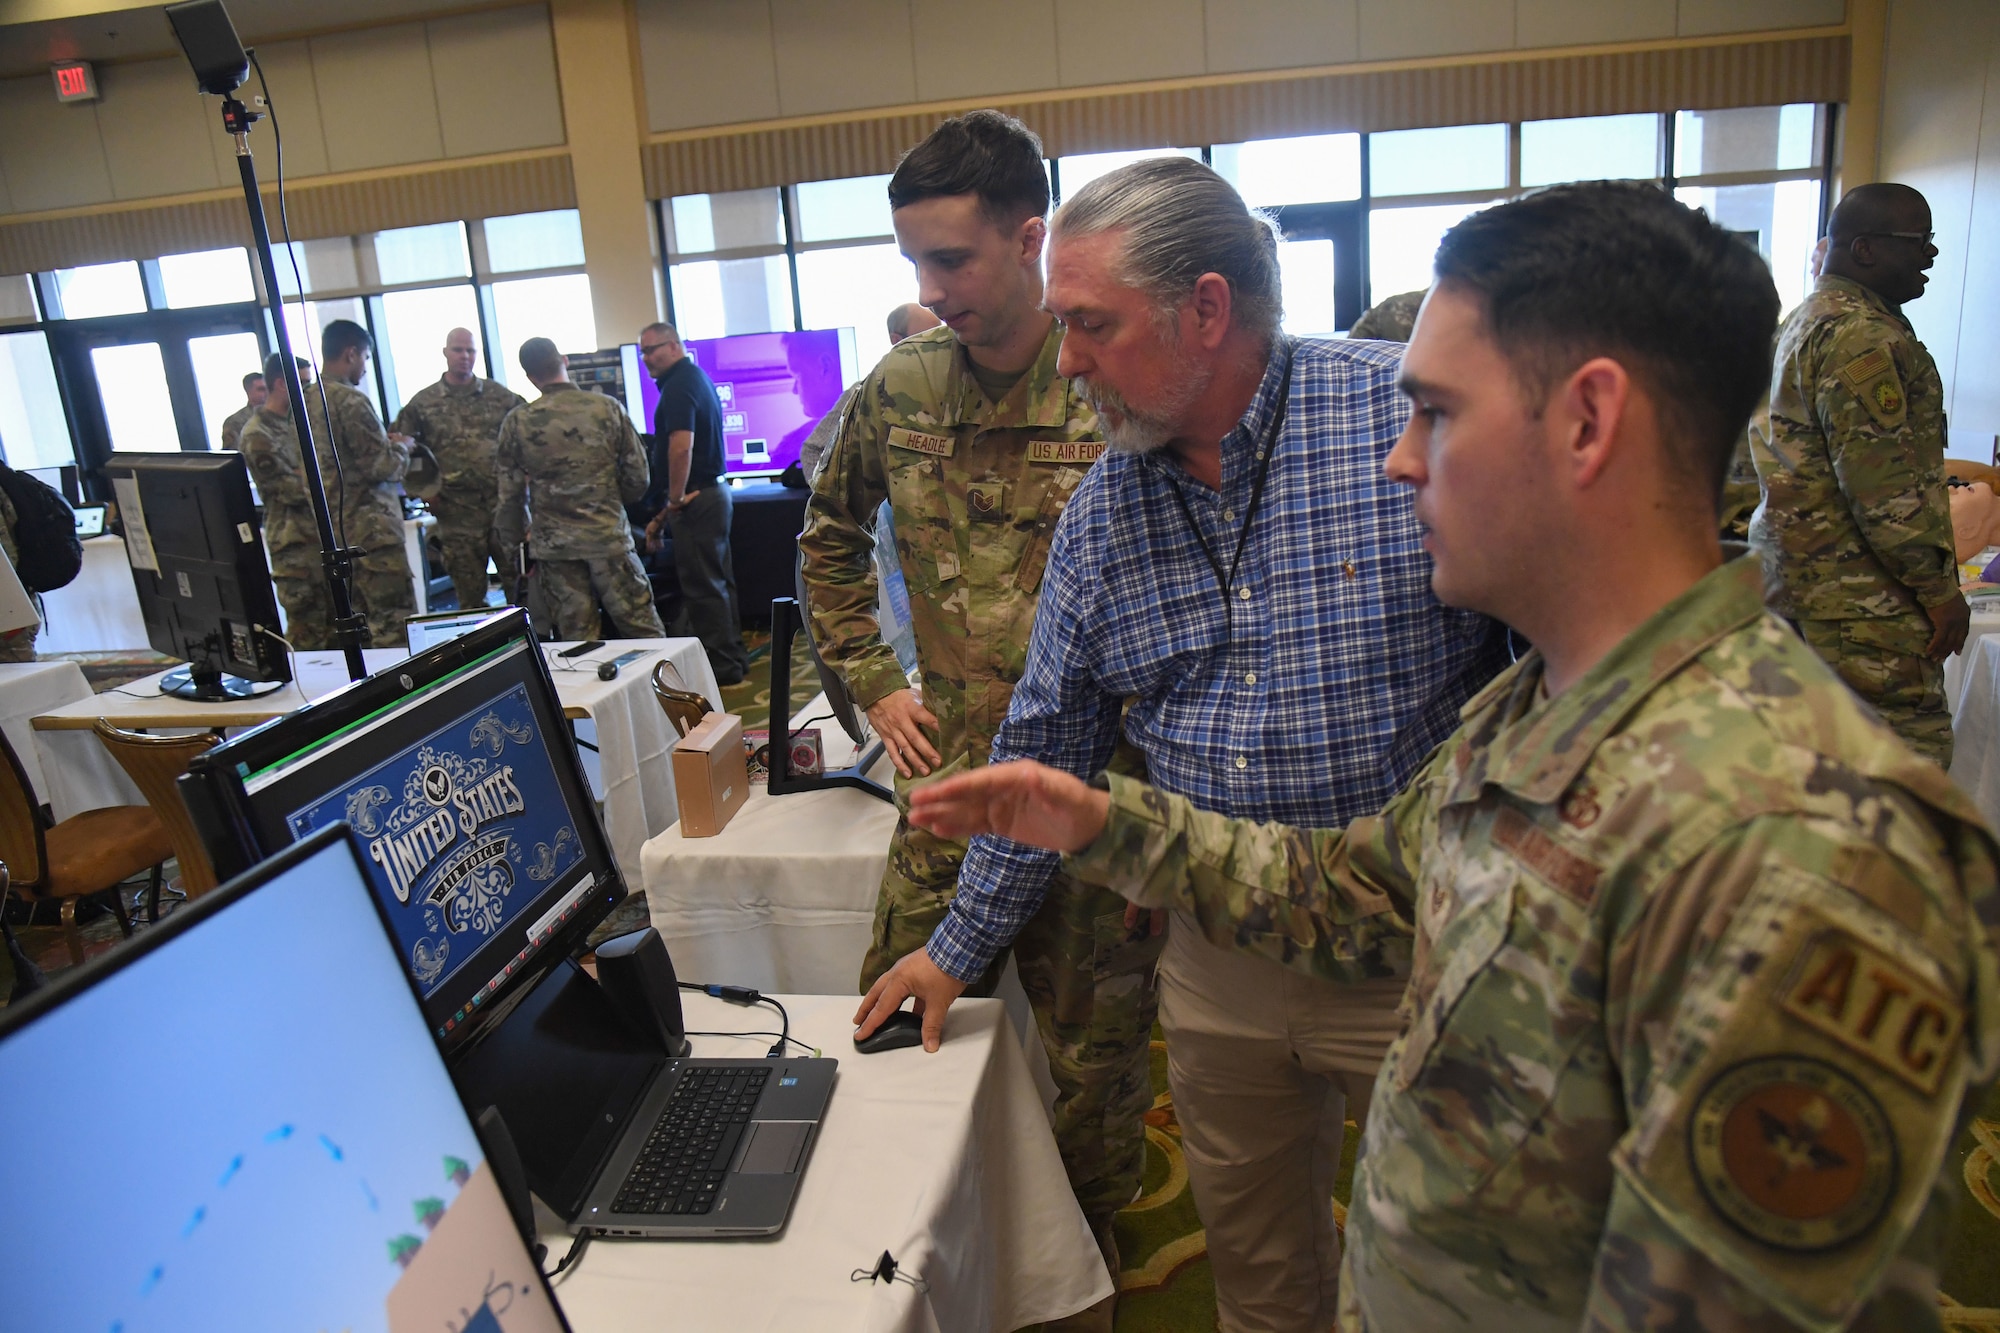 U.S. Air Force Staff Sgt. Zachary Headlee, 81st Training Support Squadron interactive multimedia developer, Ronald Warr, 81st TRSS information technology specialist, and Tech. Sgt. Jeremy Roosa, 334th Training Squadron instructor, discuss the instructional technology unit capabilities and products during the innovation expo during the Second Air Force Technical Training-101 Seminar inside the Bay Breeze Event Center at Keesler Air Force Base, Mississippi, Oct. 26, 2022.